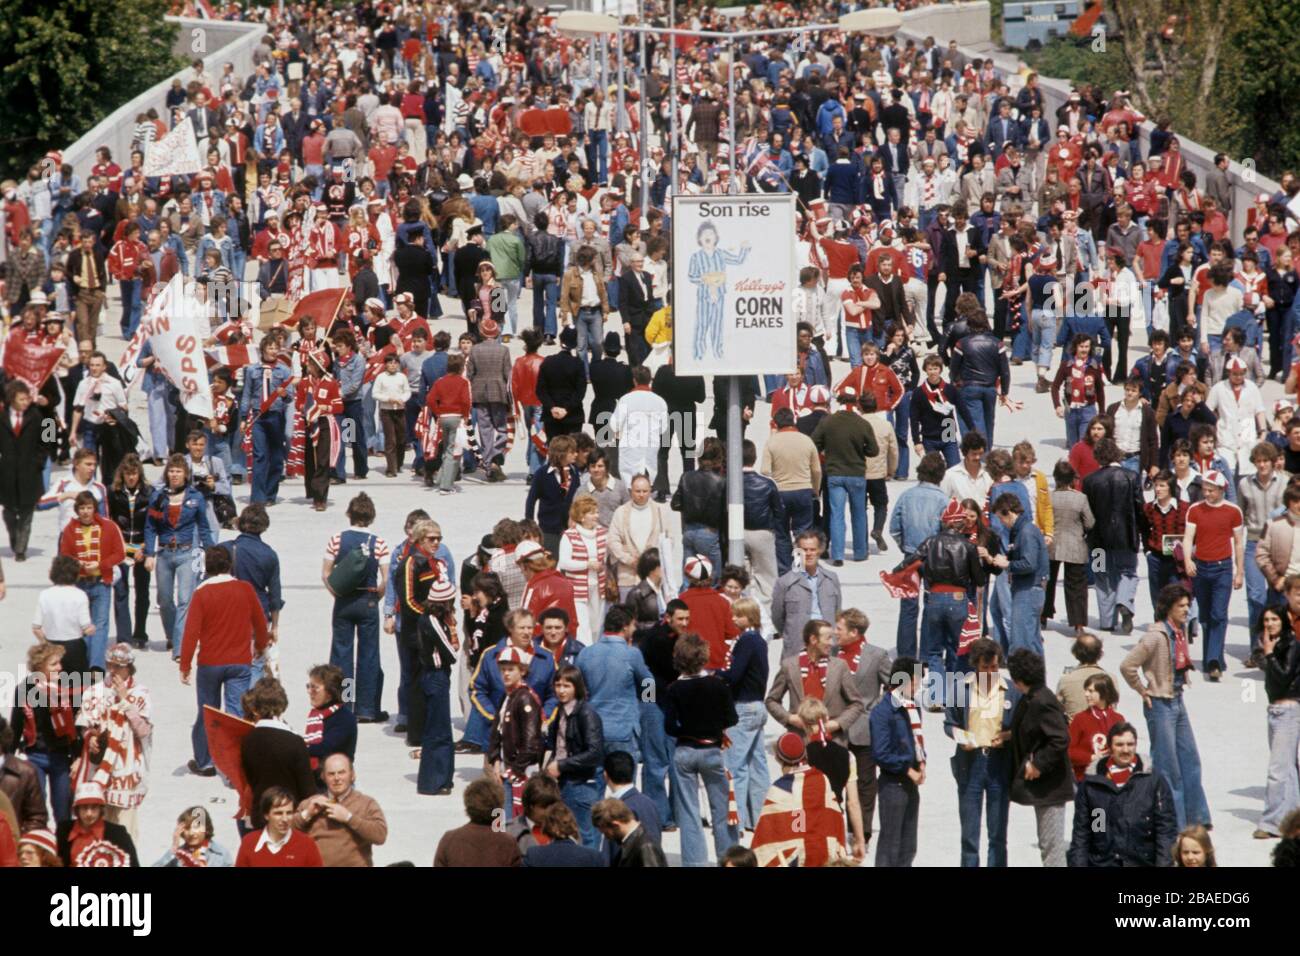 Liverpool fans on Wembley Way ahead of the final against Belgium side Club Brugge. Liverpool would go on to win the game 1-0 thanks to a Kenny Dalglish (not pictured) goal. Stock Photo